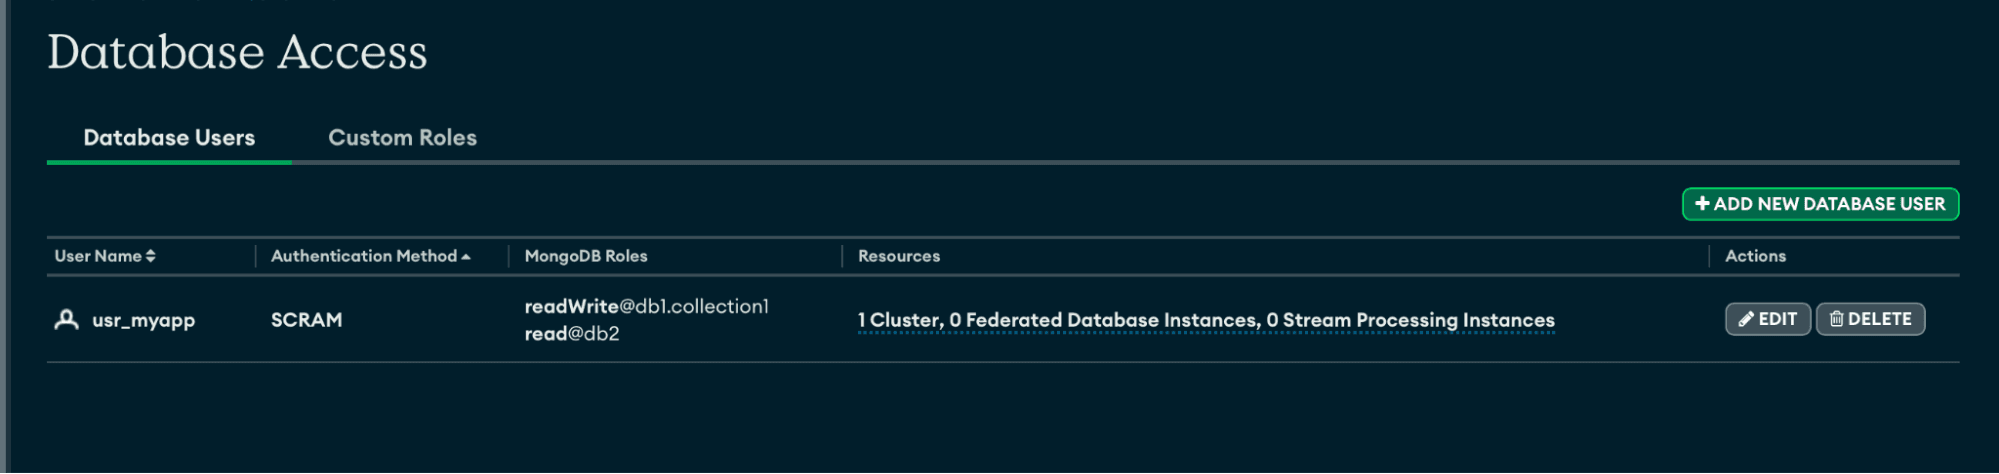 User displayed in database access